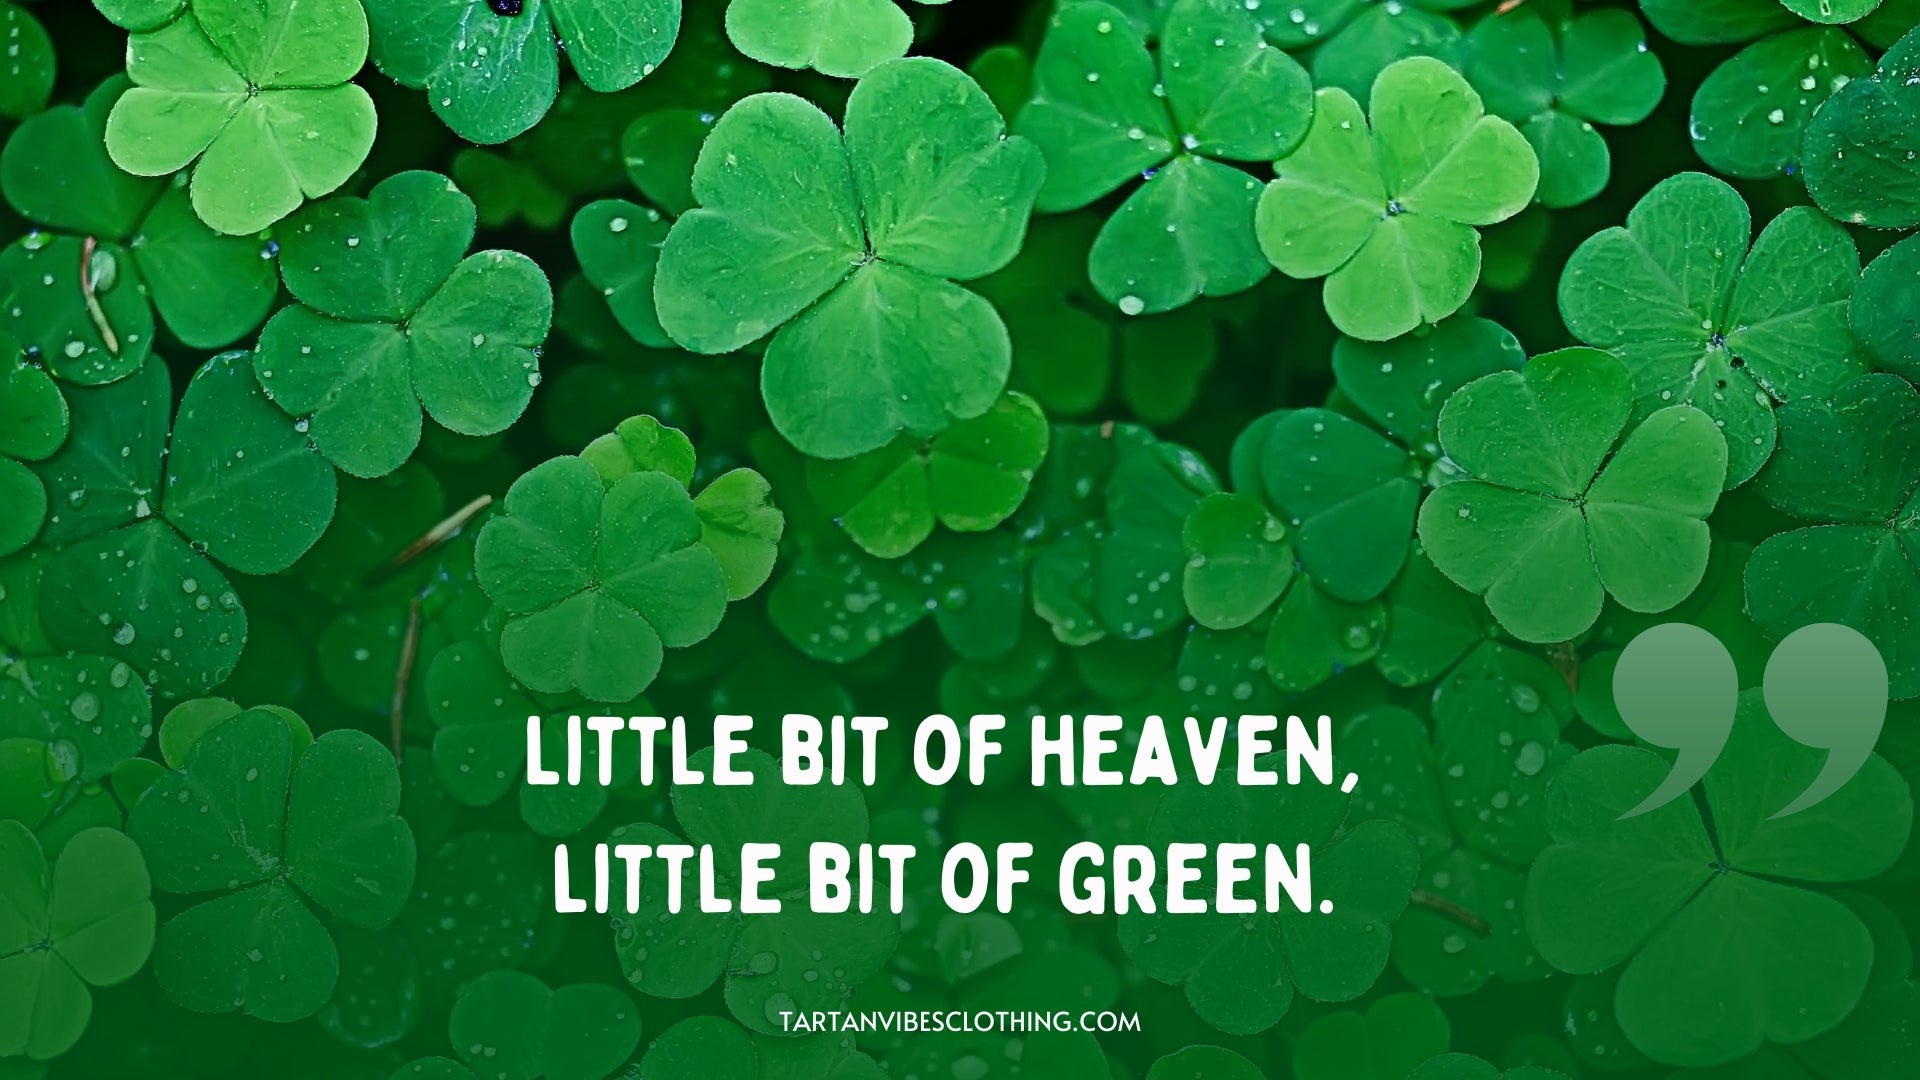 Cute St. Patrick's Day Instagram Captions